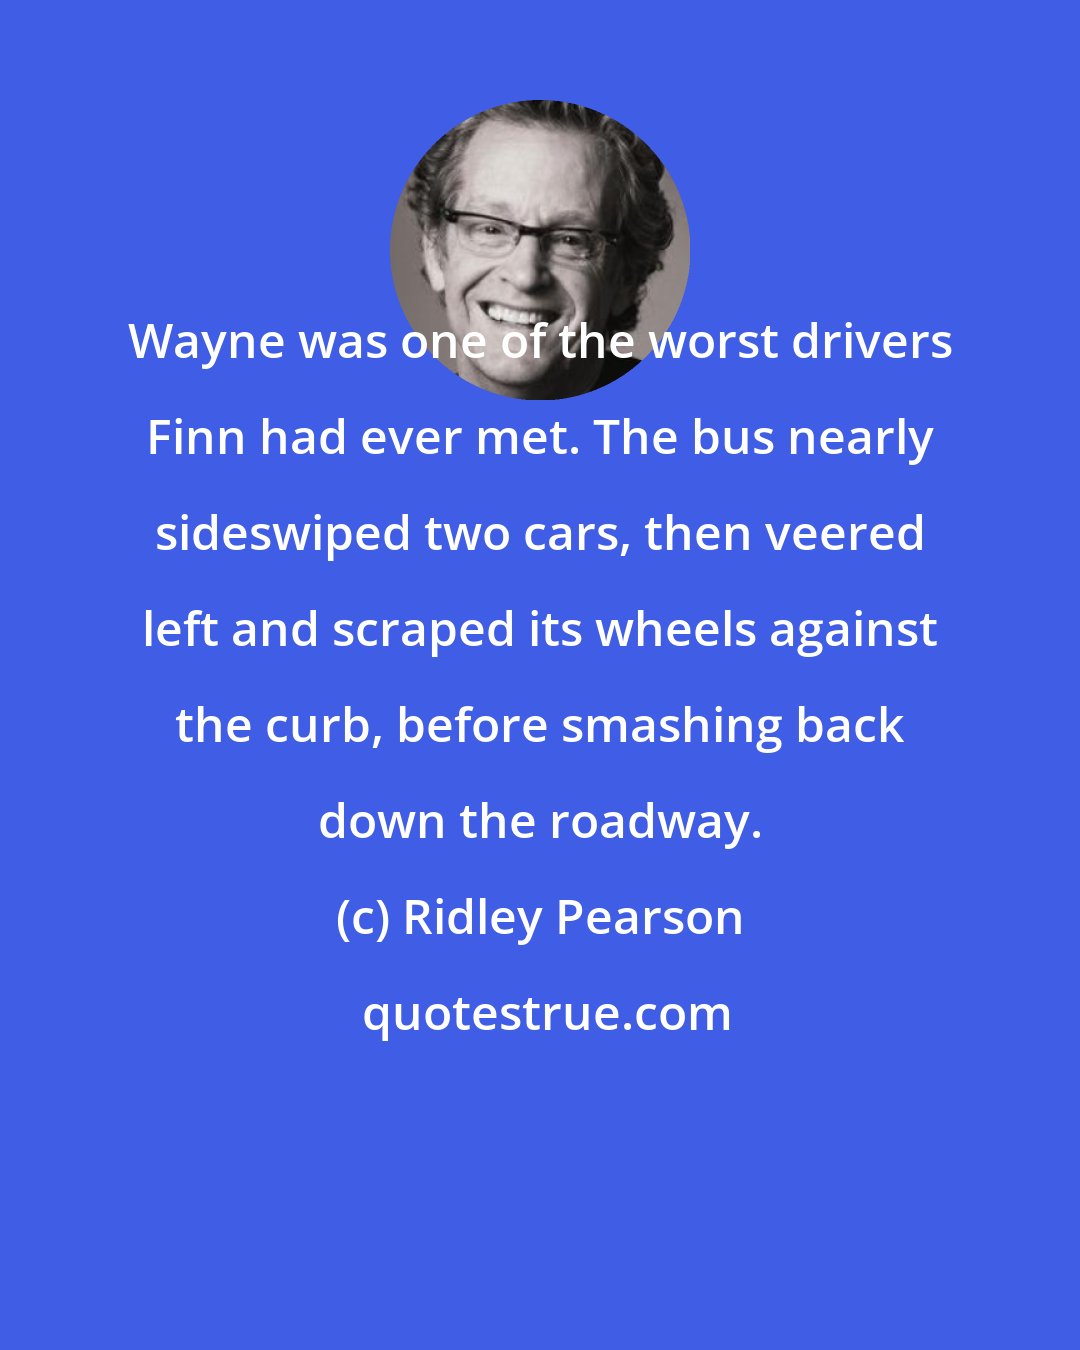 Ridley Pearson: Wayne was one of the worst drivers Finn had ever met. The bus nearly sideswiped two cars, then veered left and scraped its wheels against the curb, before smashing back down the roadway.